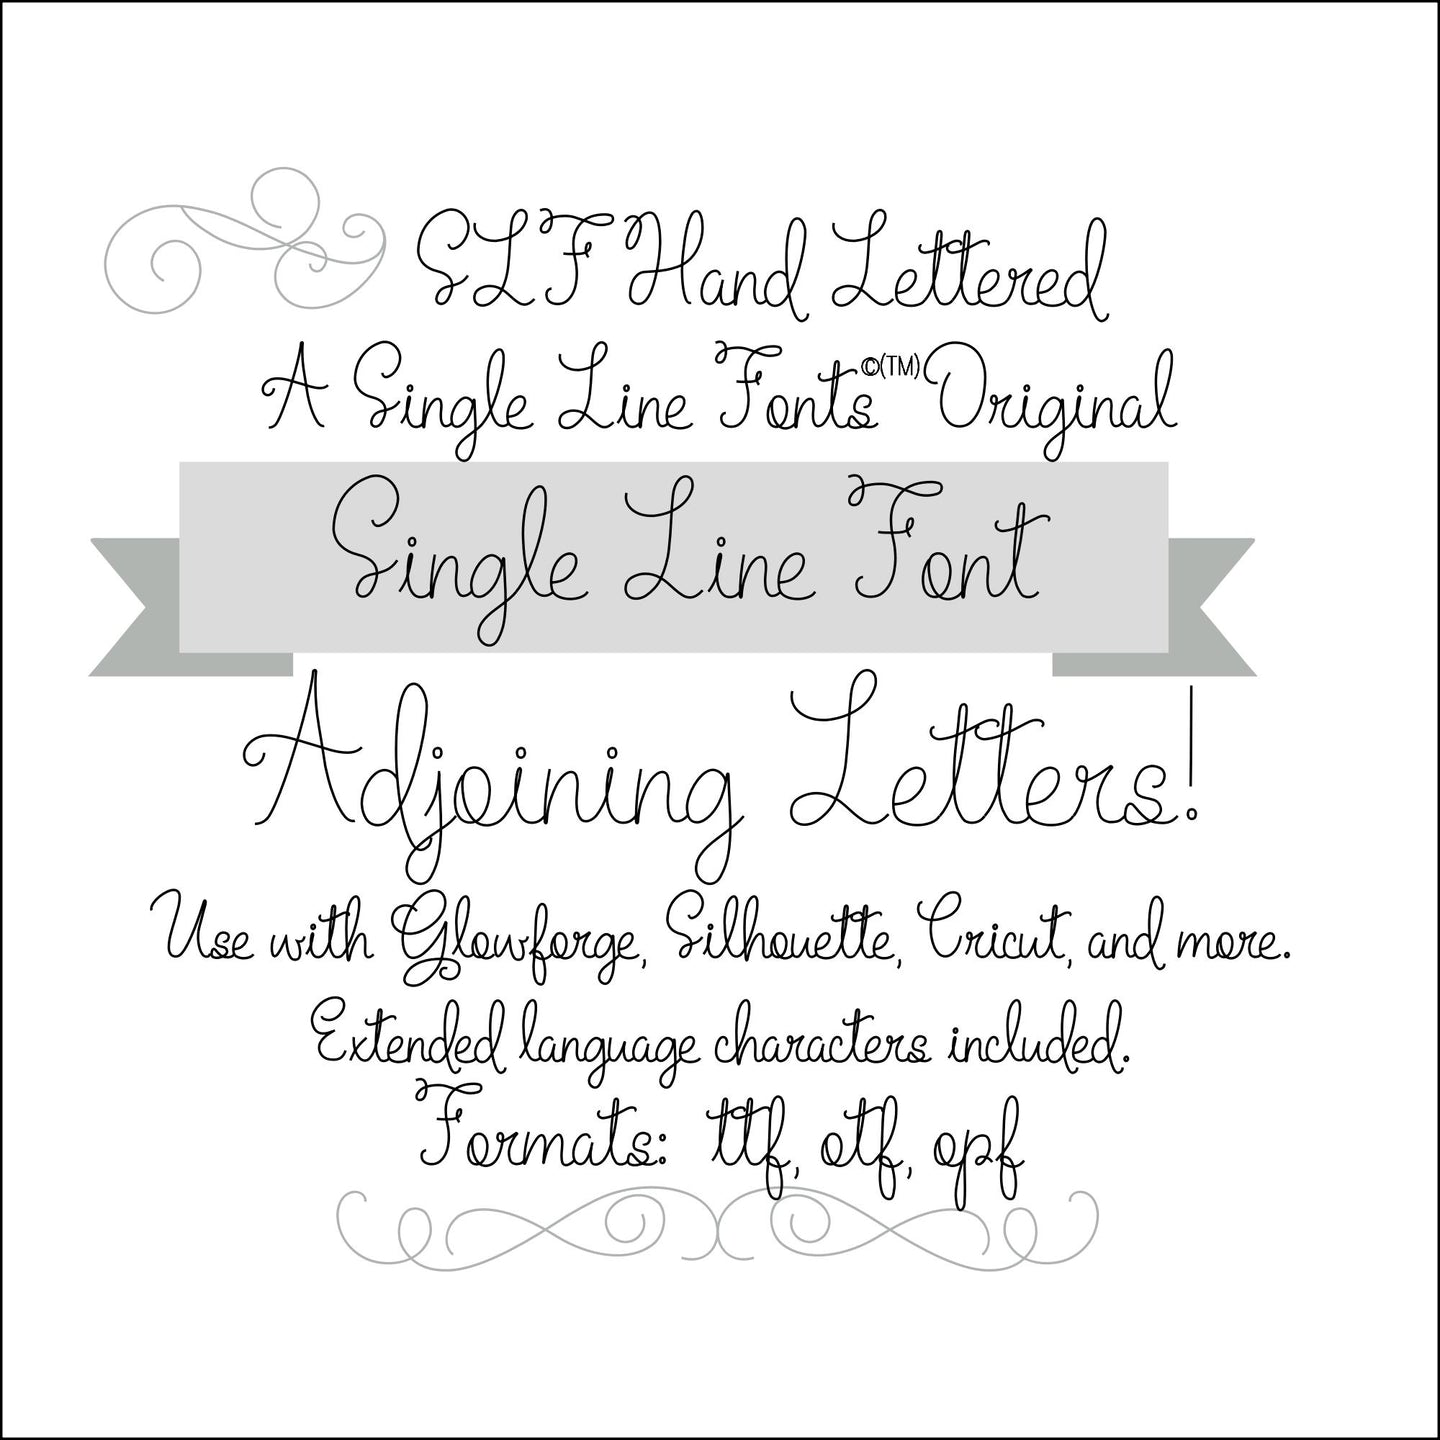 slf hand lettered single line font for silhouette cricut brother scan n cut pazzles 